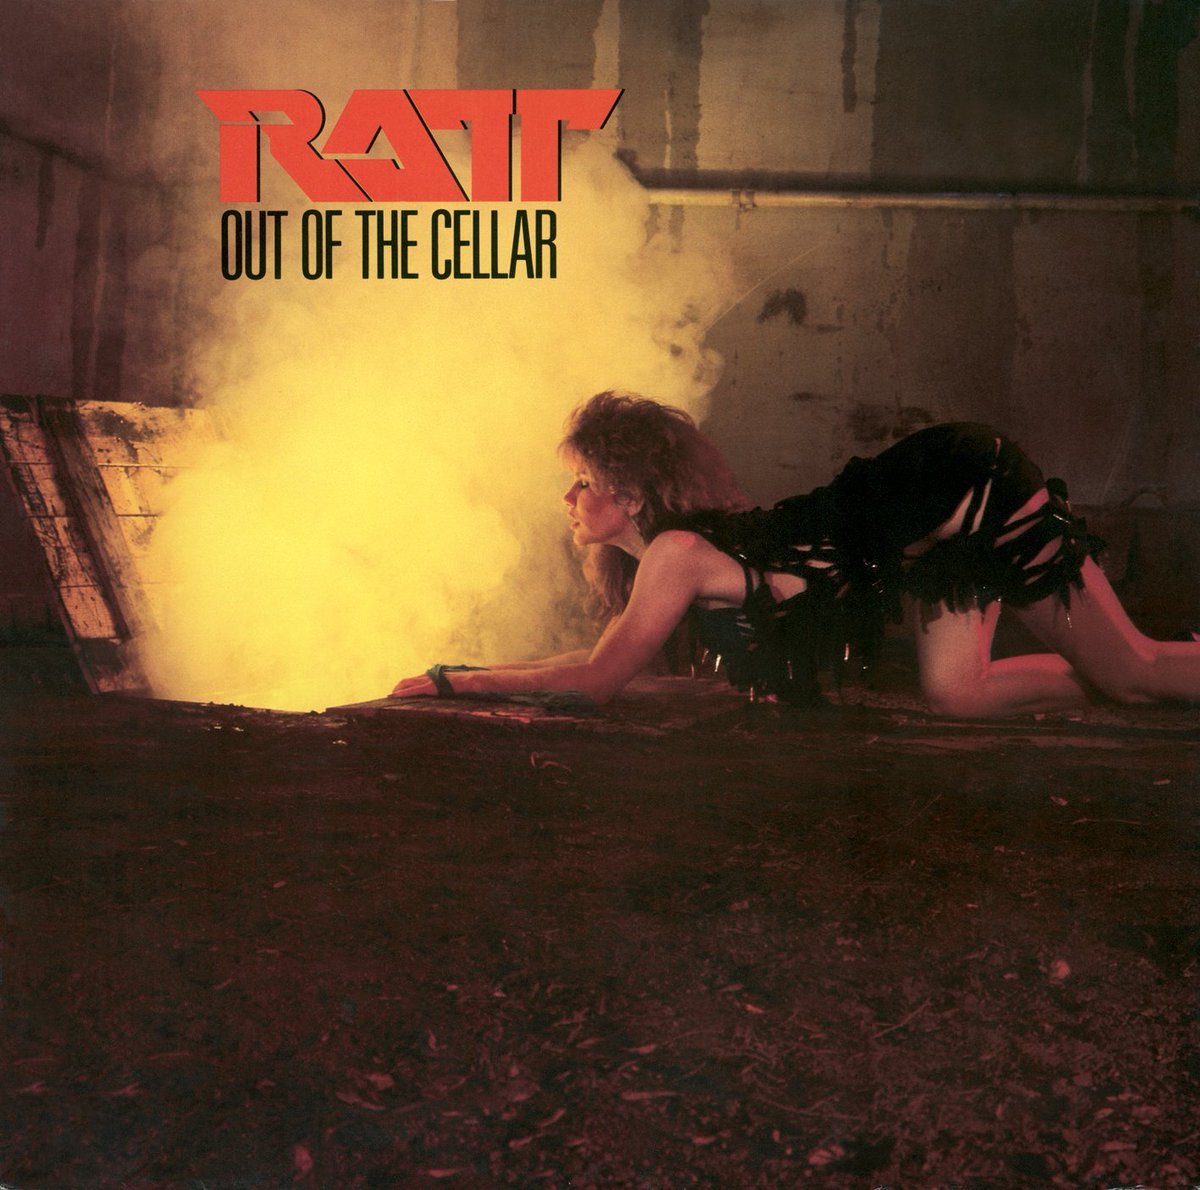 #OnThisDay in 1984, Ratt's full length debut album 'Out Of The Cellar' peaked at #7 on the Billboard 200 Album Chart. It's Ratt's best selling release with 3x platinum certification in the US #80sMetal #GlamMetal #ClassicRock #RattandRoll